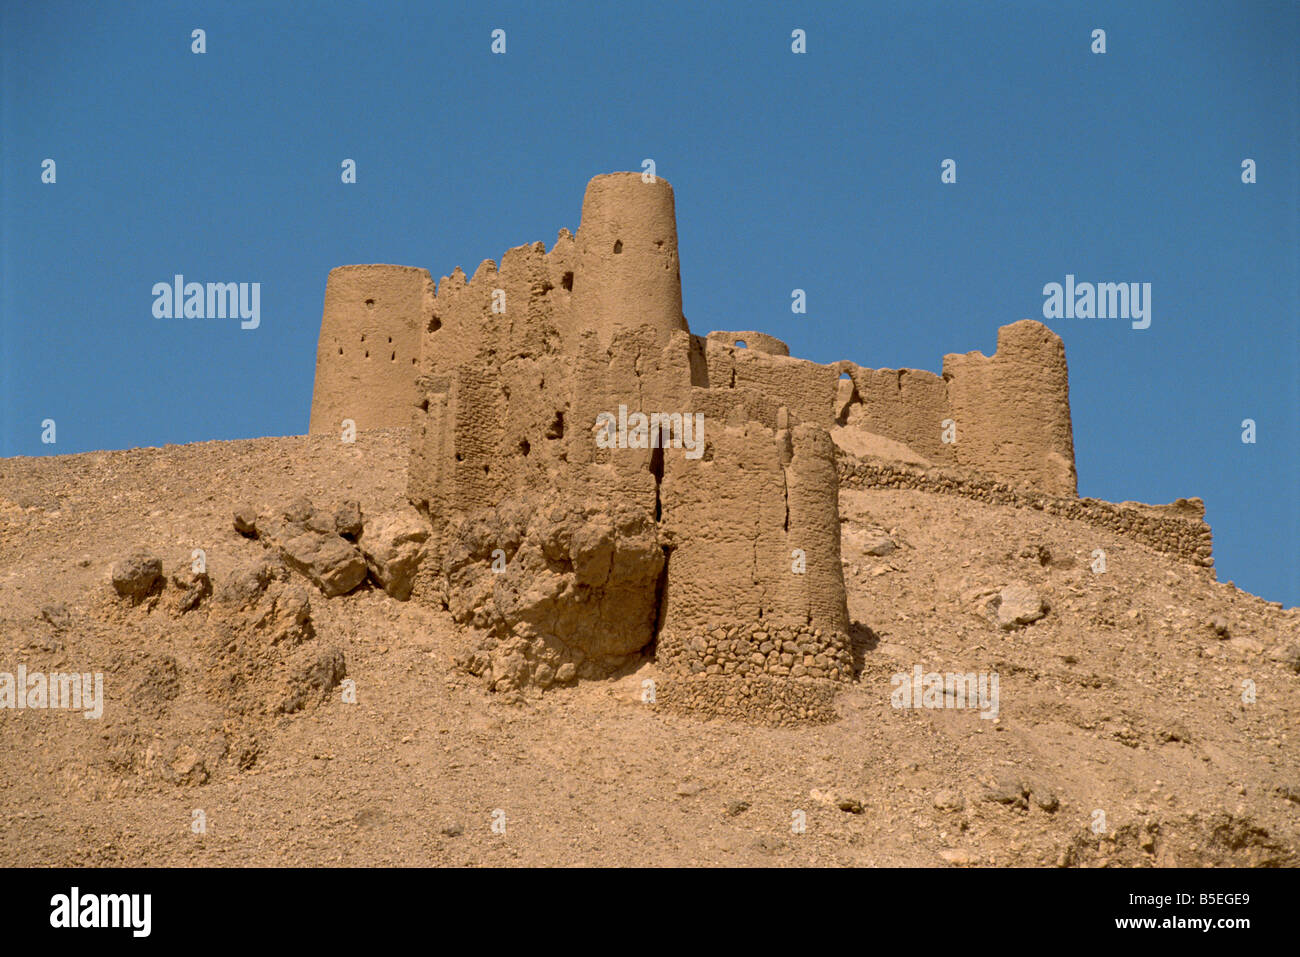 Fort on hilltop at the Sultan's customs post, Tarim, in the Wadi Hadramaut, south Yemen, Middle East Stock Photo